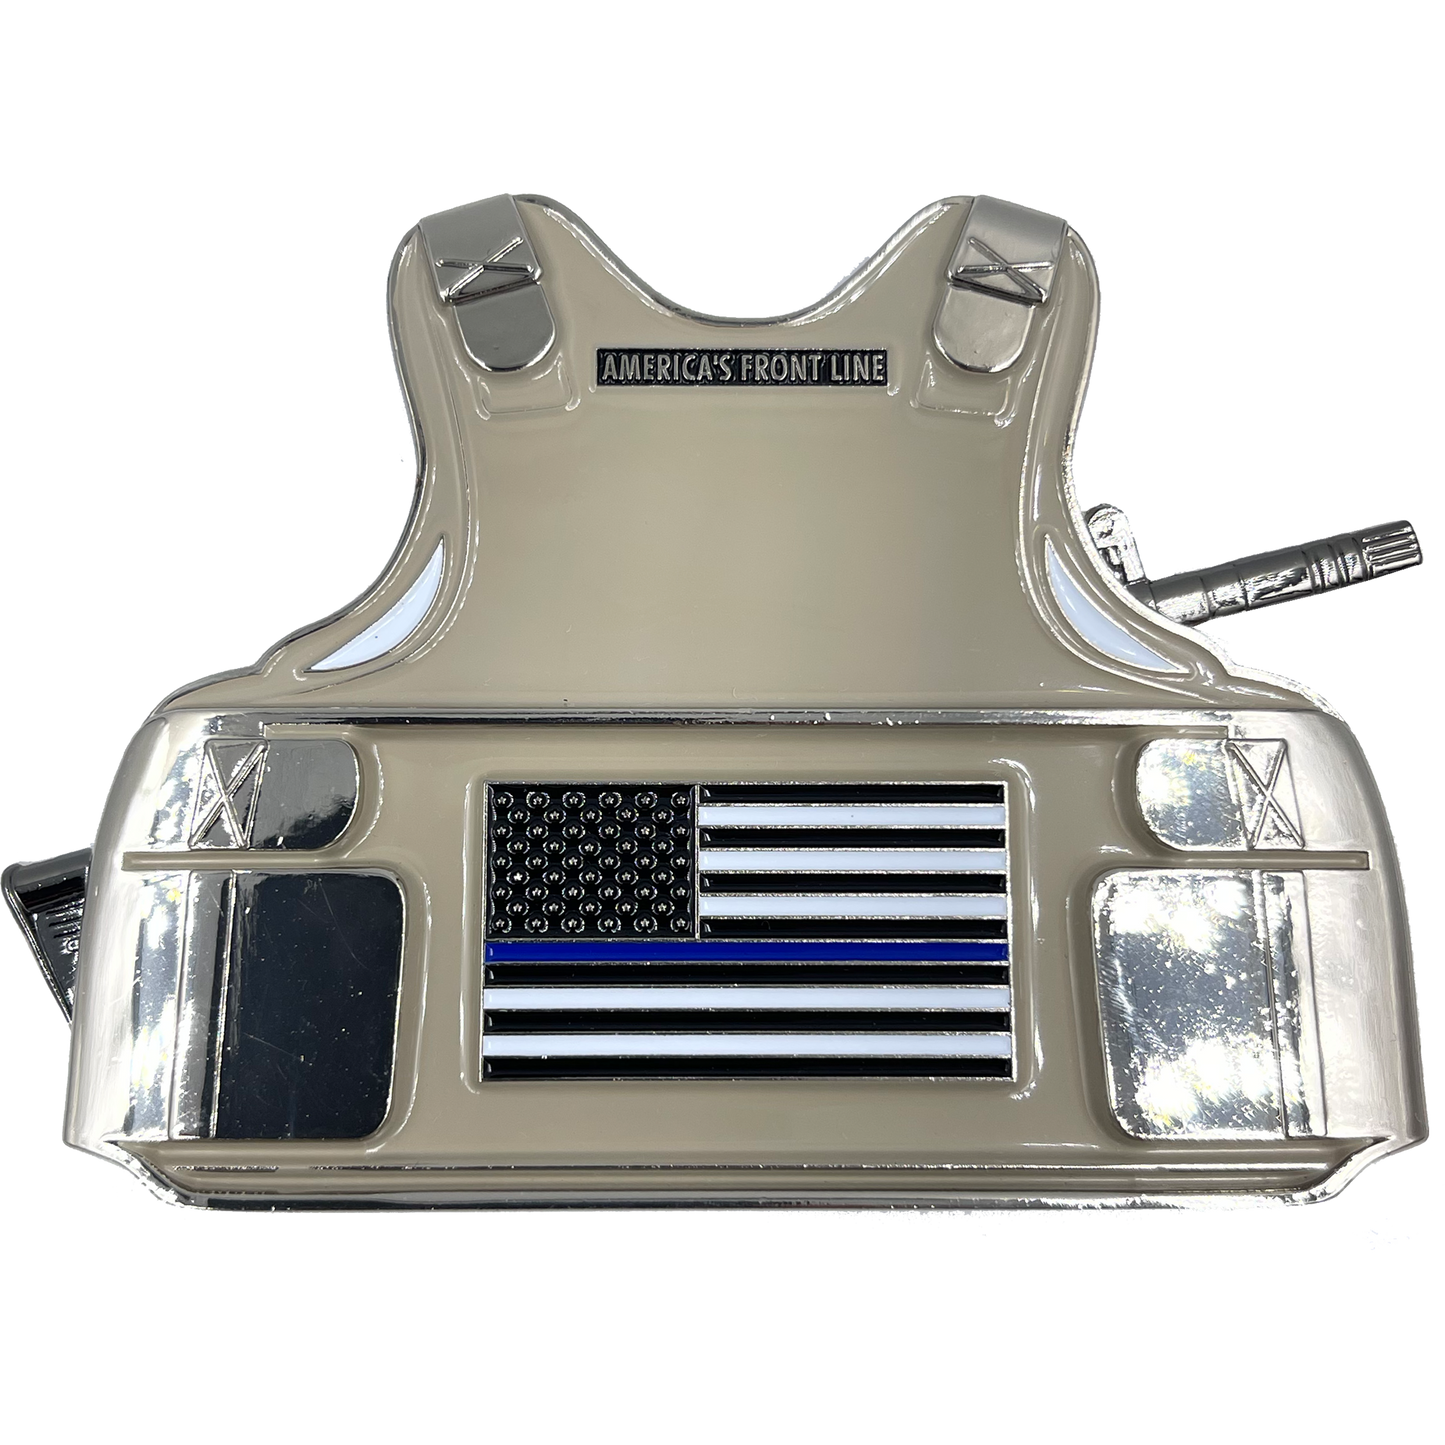 Discontinued EL5-008 California Highway Patrol CHP Firearms Instructor M4 Body Armor 3D self standing Challenge Coin Thin Blue Line